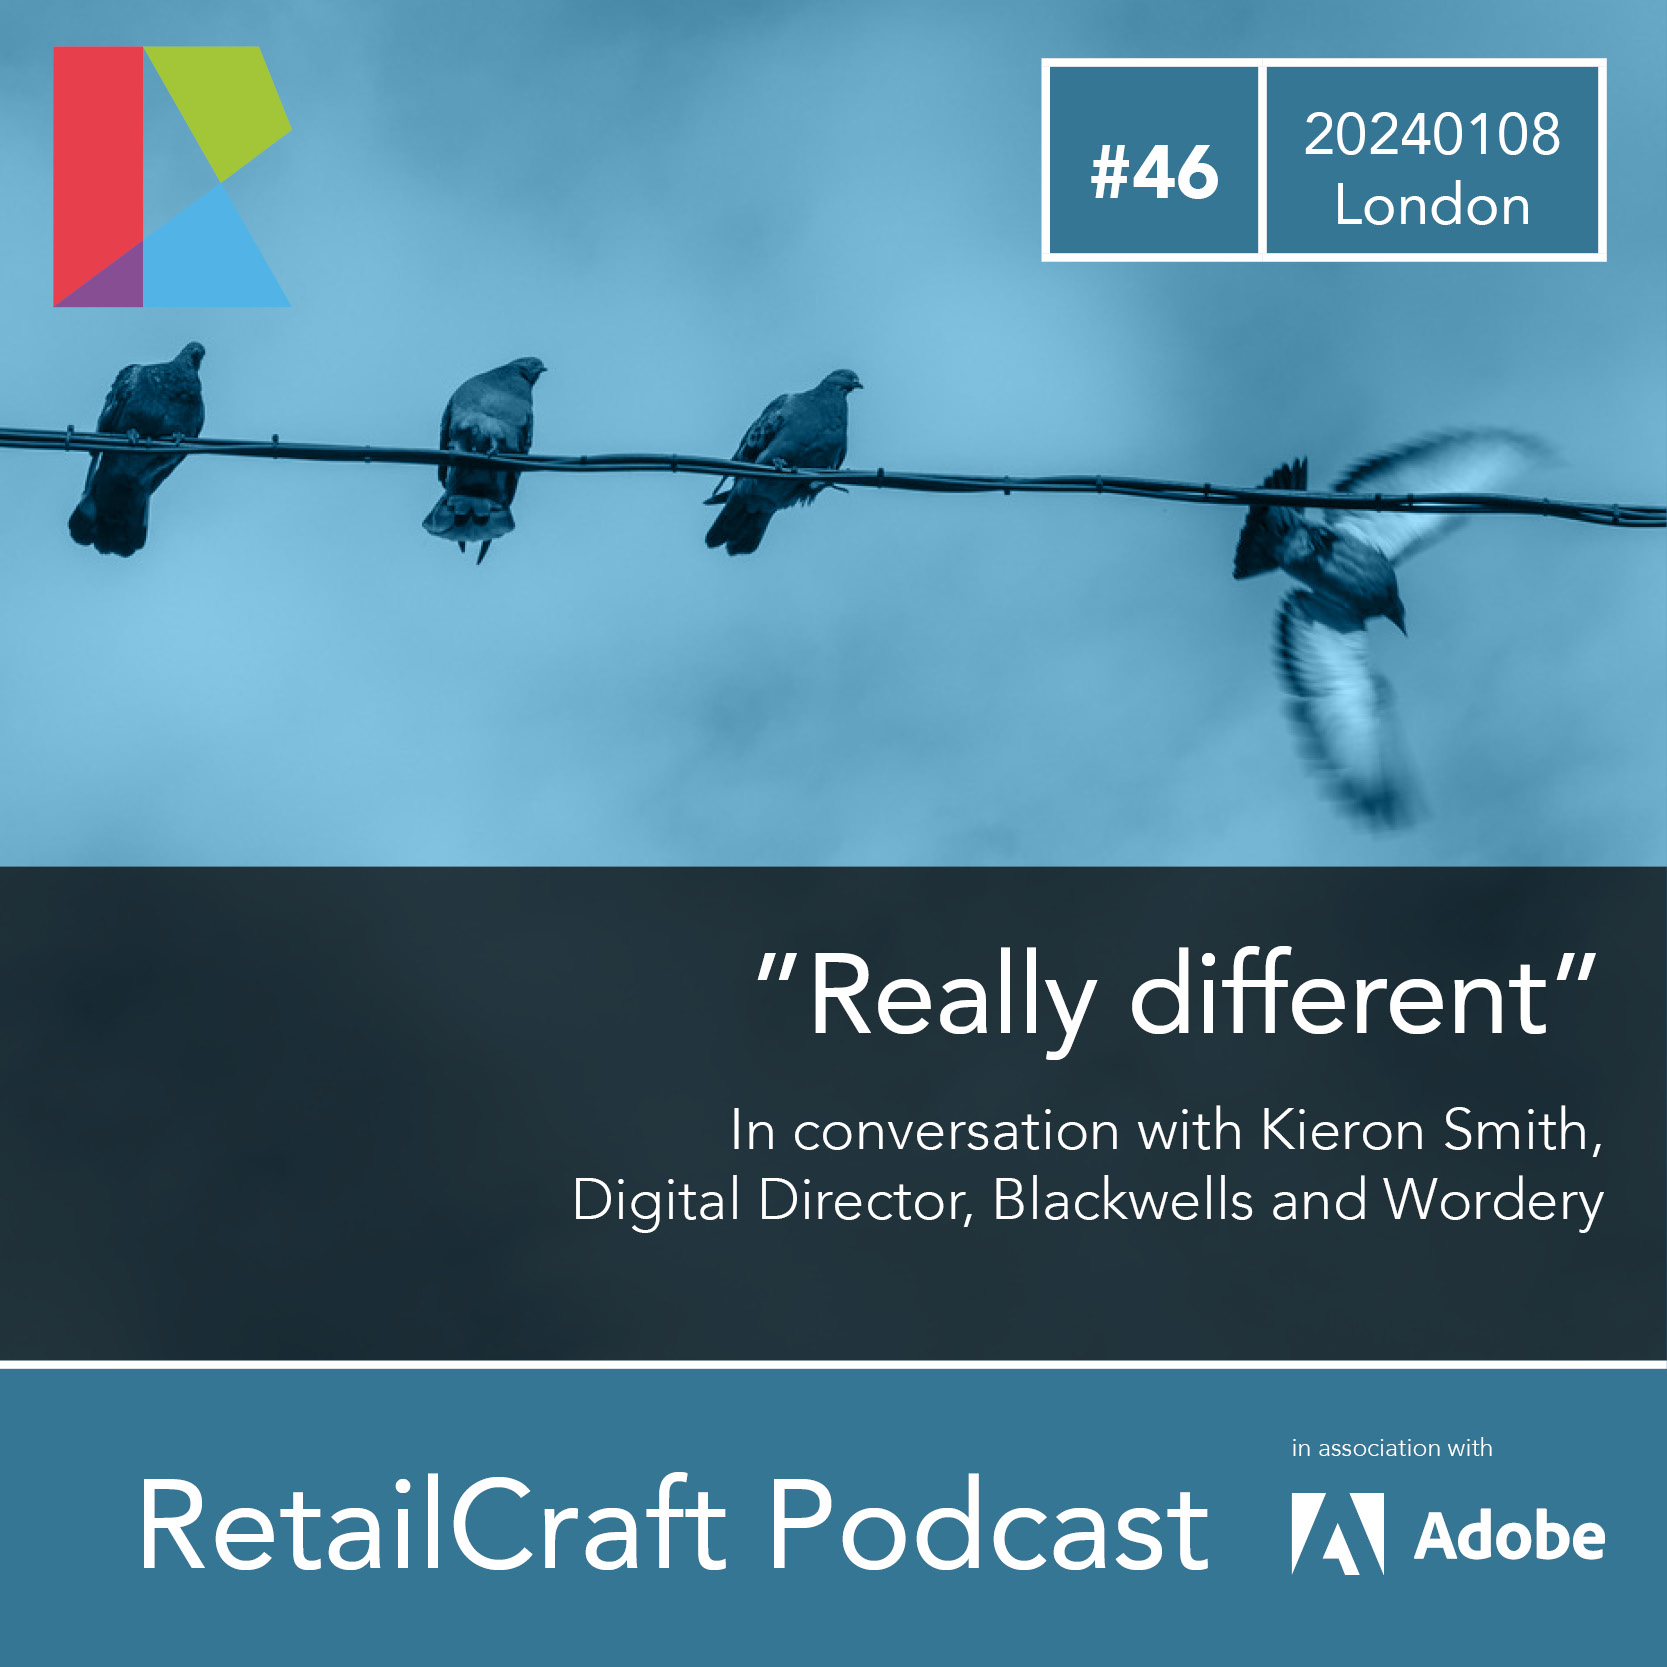 RetailCraft Podcast #46 – ”Really Different” – in conversation Kieron Smith, Digital Director of Blackwells, and Wordery